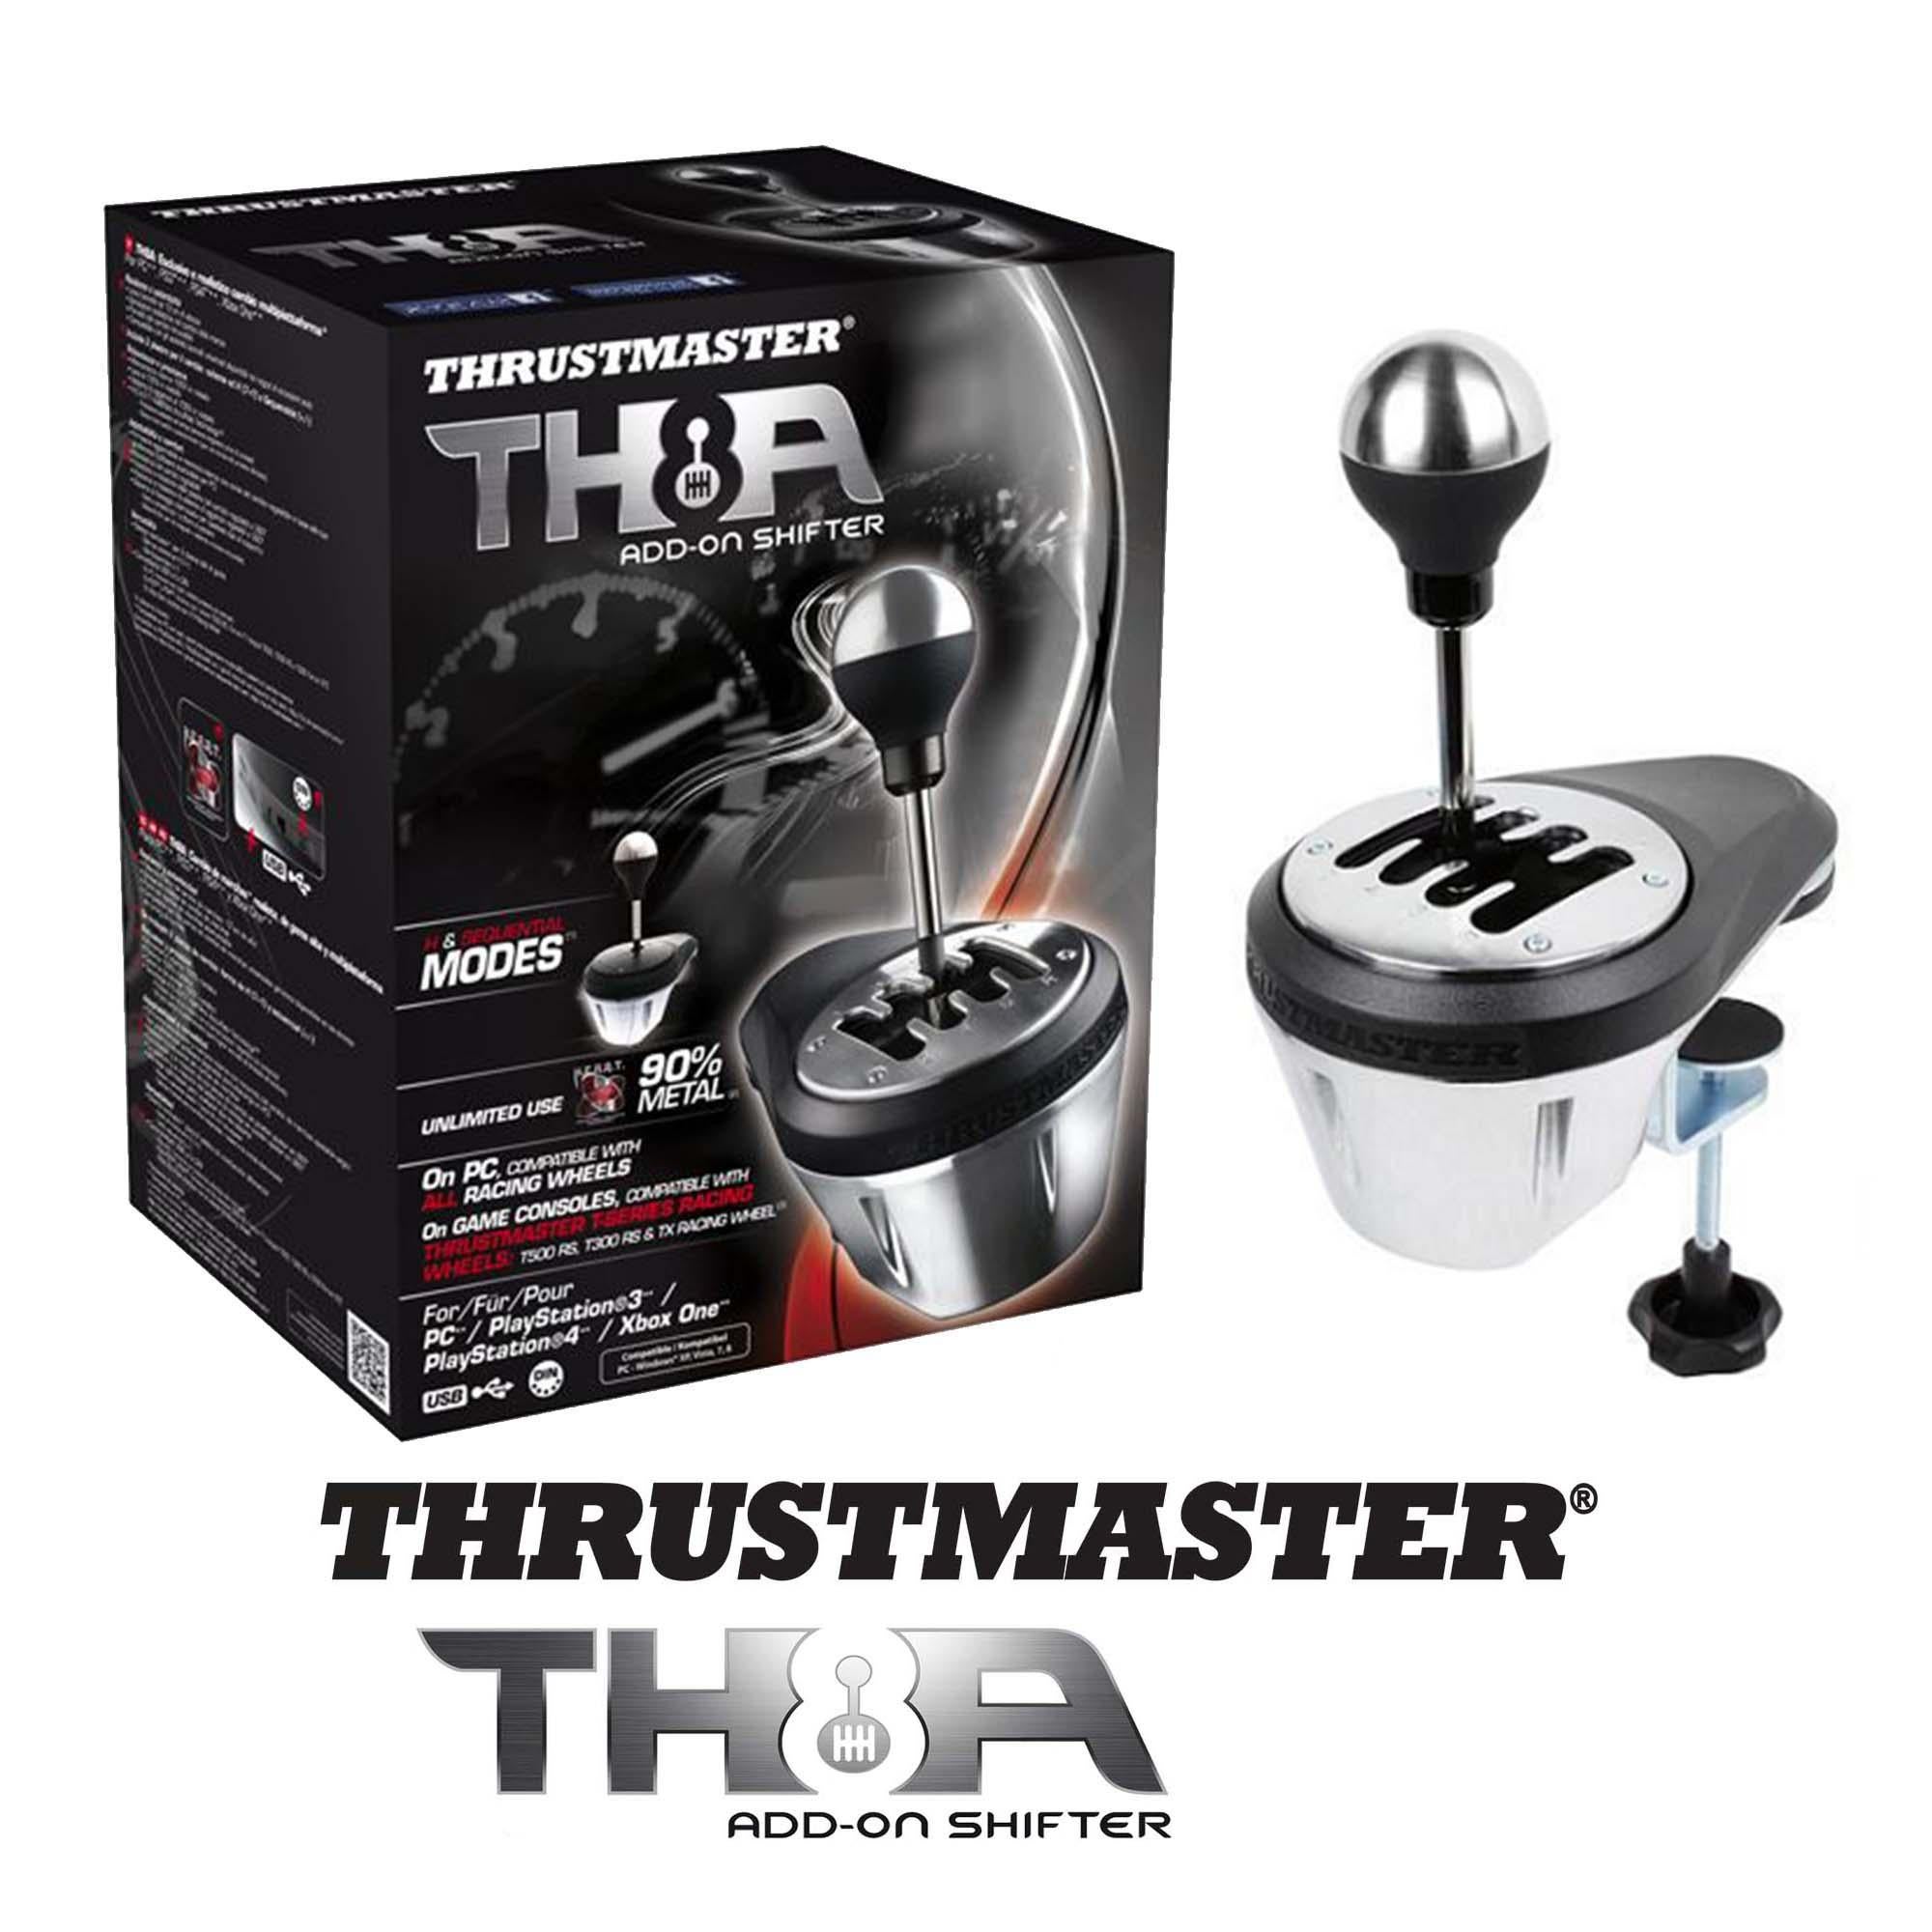 THRUSTMASTER Thrustmaster TH8A Shifter Add-On ลด 4.0% Central Online